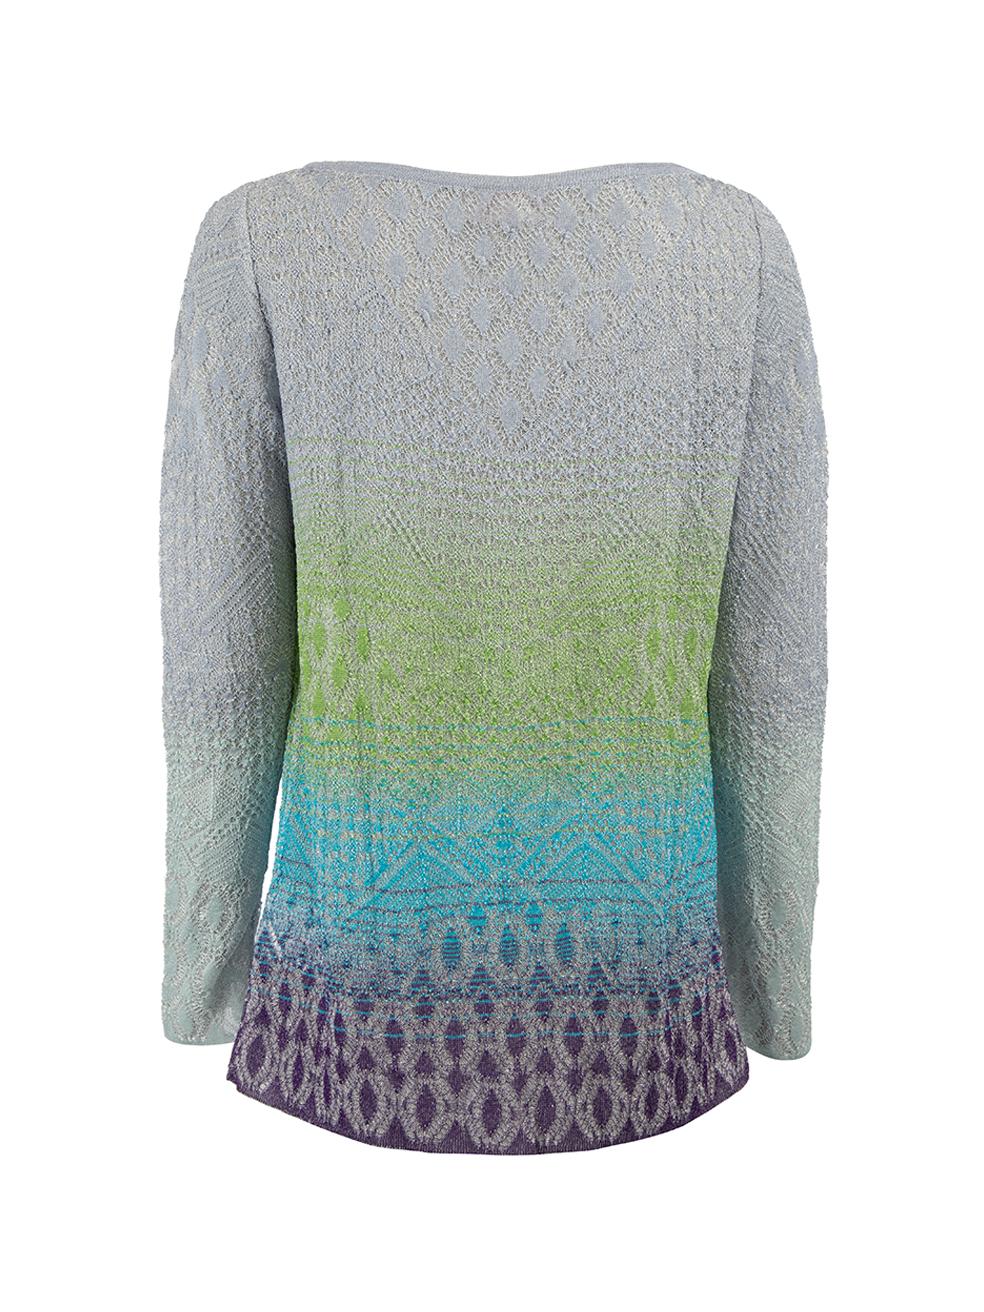 Gray Pre-Loved Missoni Women's Gradient Long Sleeve Top with Shimmer Details For Sale